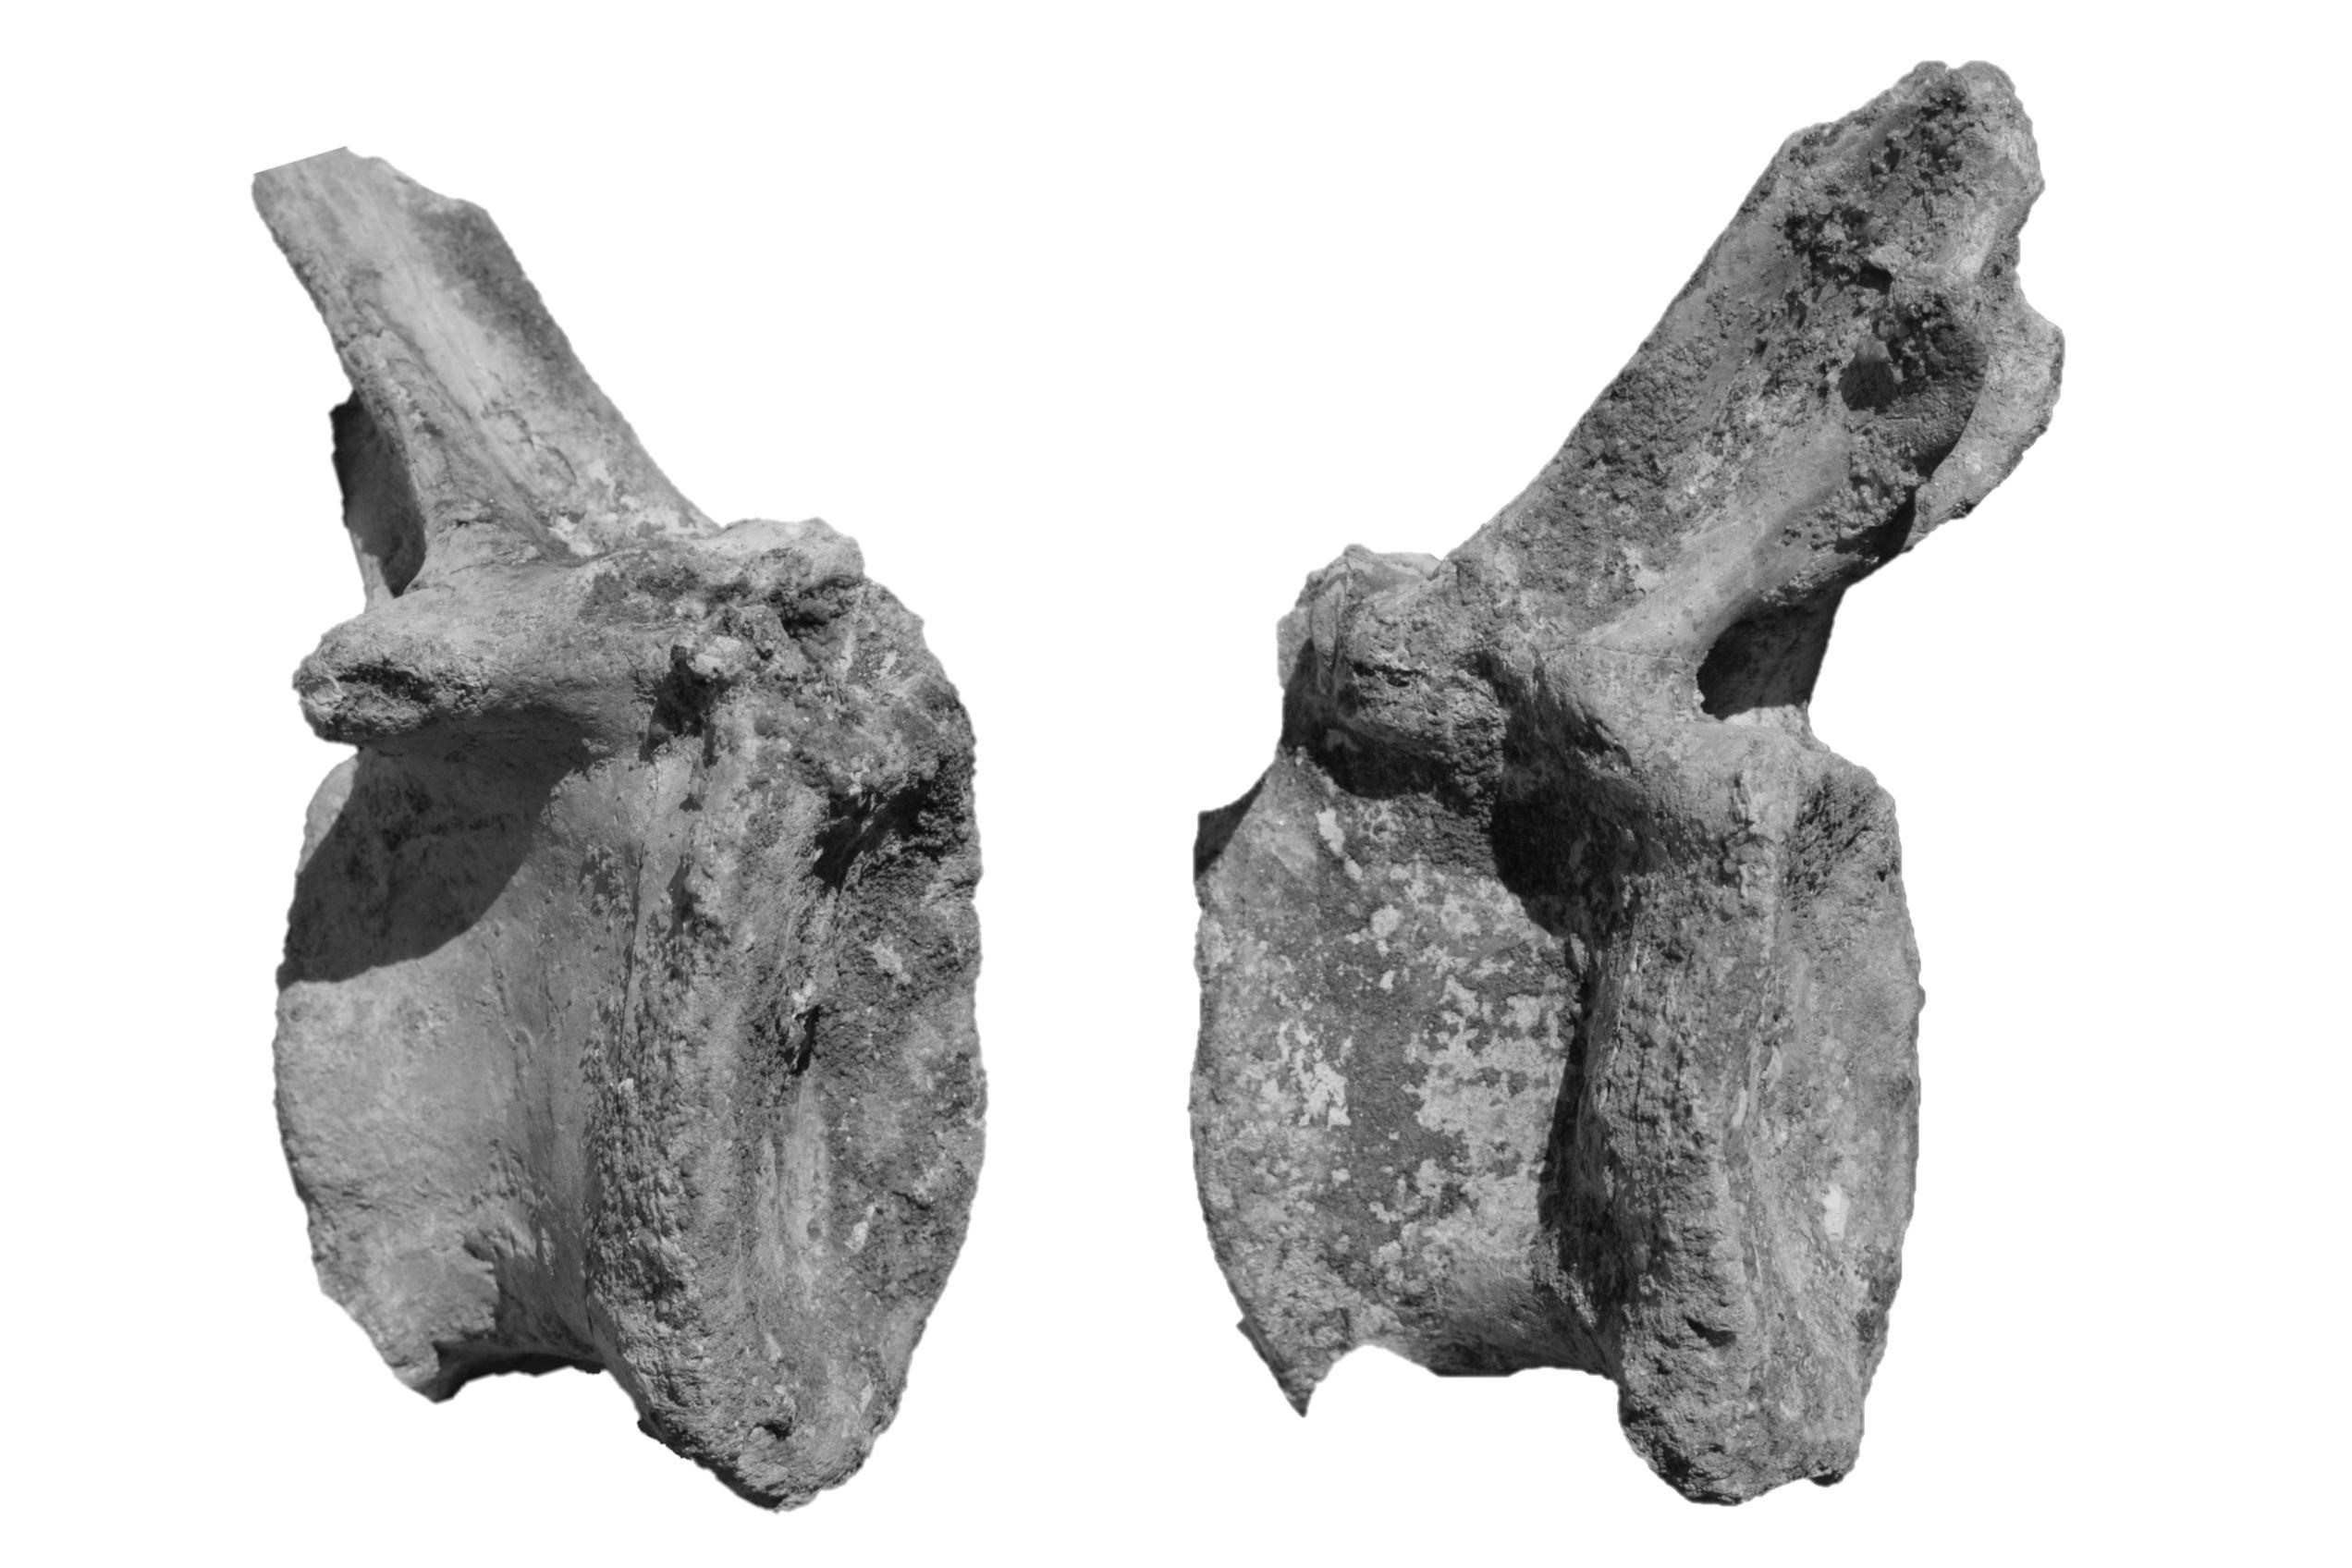 Mid caudal vertebra (R393243465120-2104) of Spinosaurid tentatively refer as Spinosaurus dorsojuvencus. From left image: in right lateral view (side view); Right image: in left lateral view